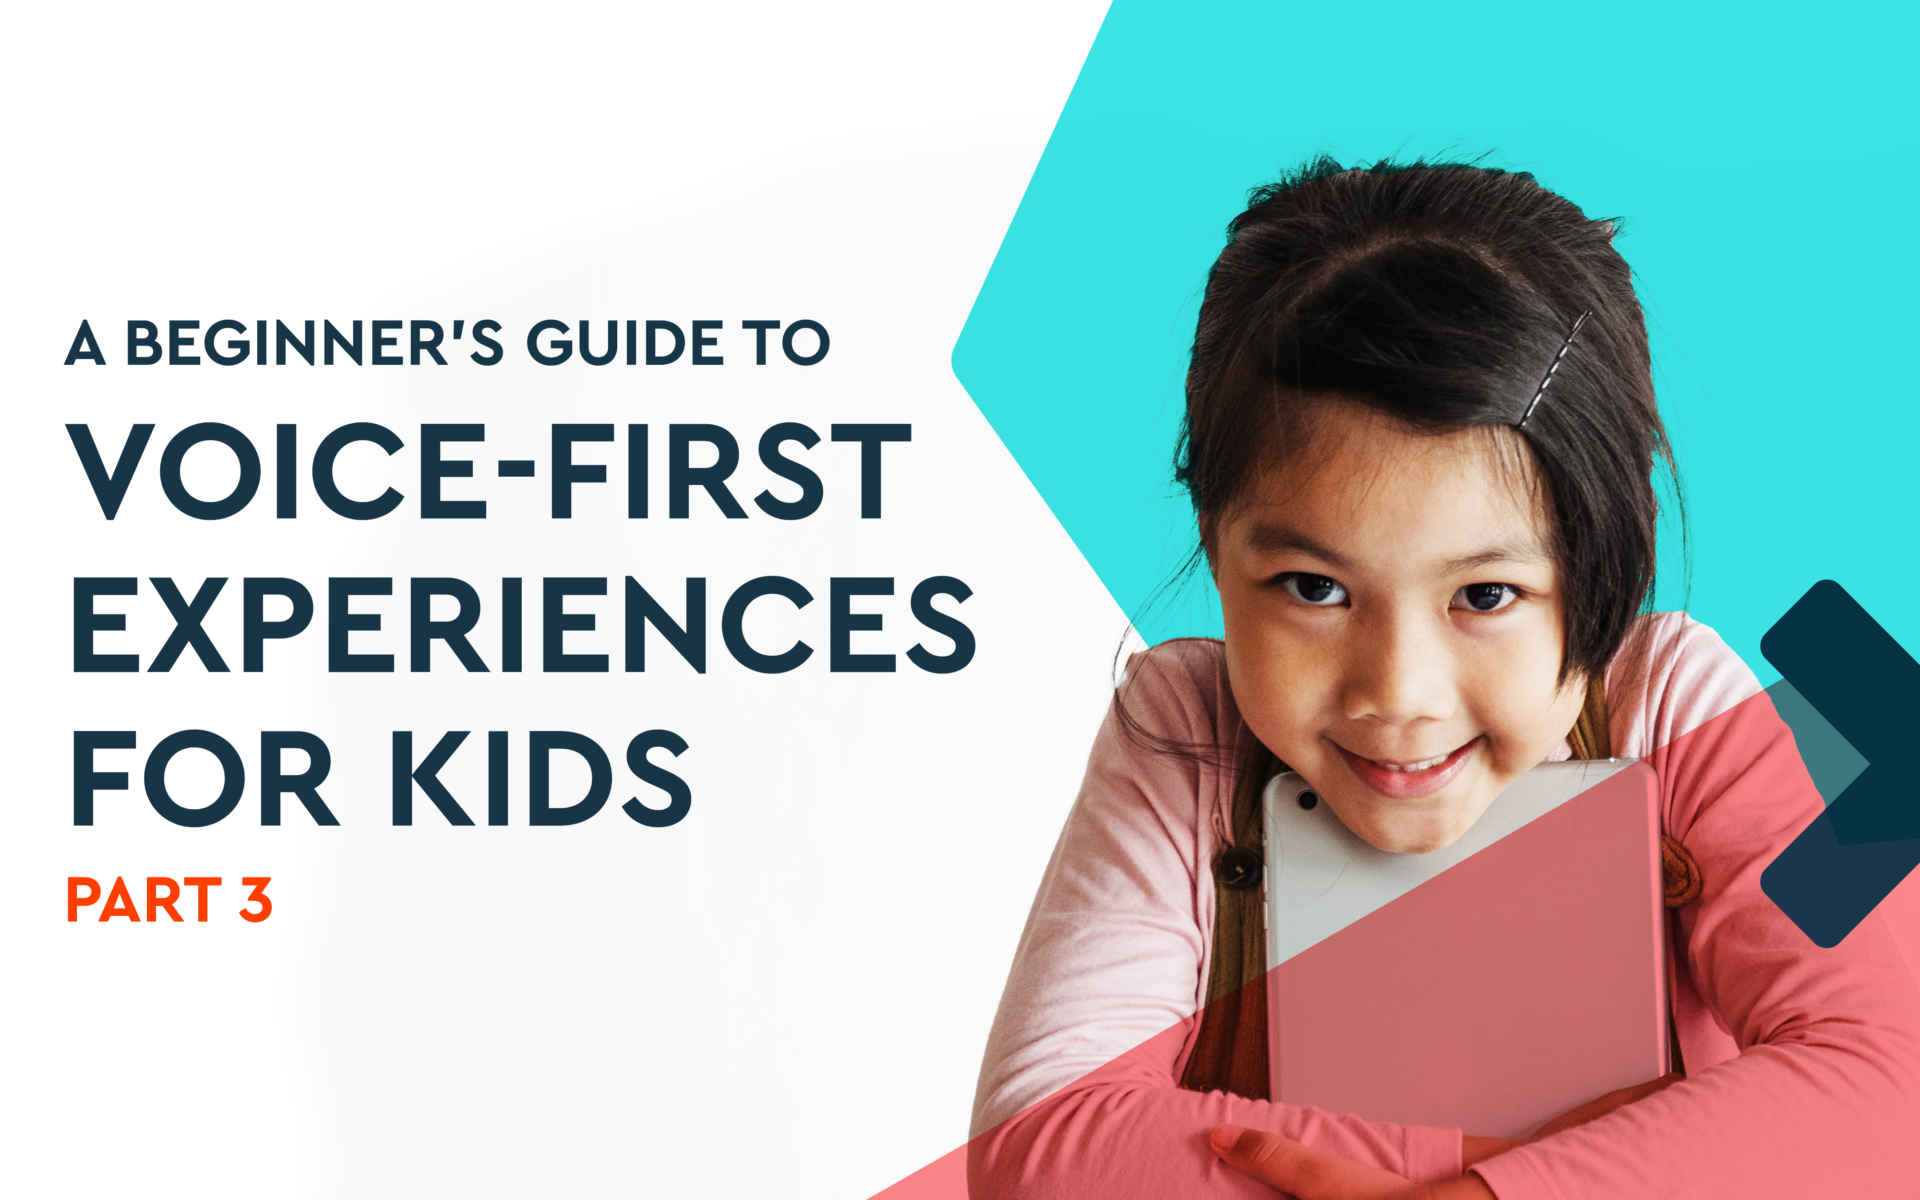 Image says, "A Beginner's Guide to Voice-First Experiences for Kids: Part 3."